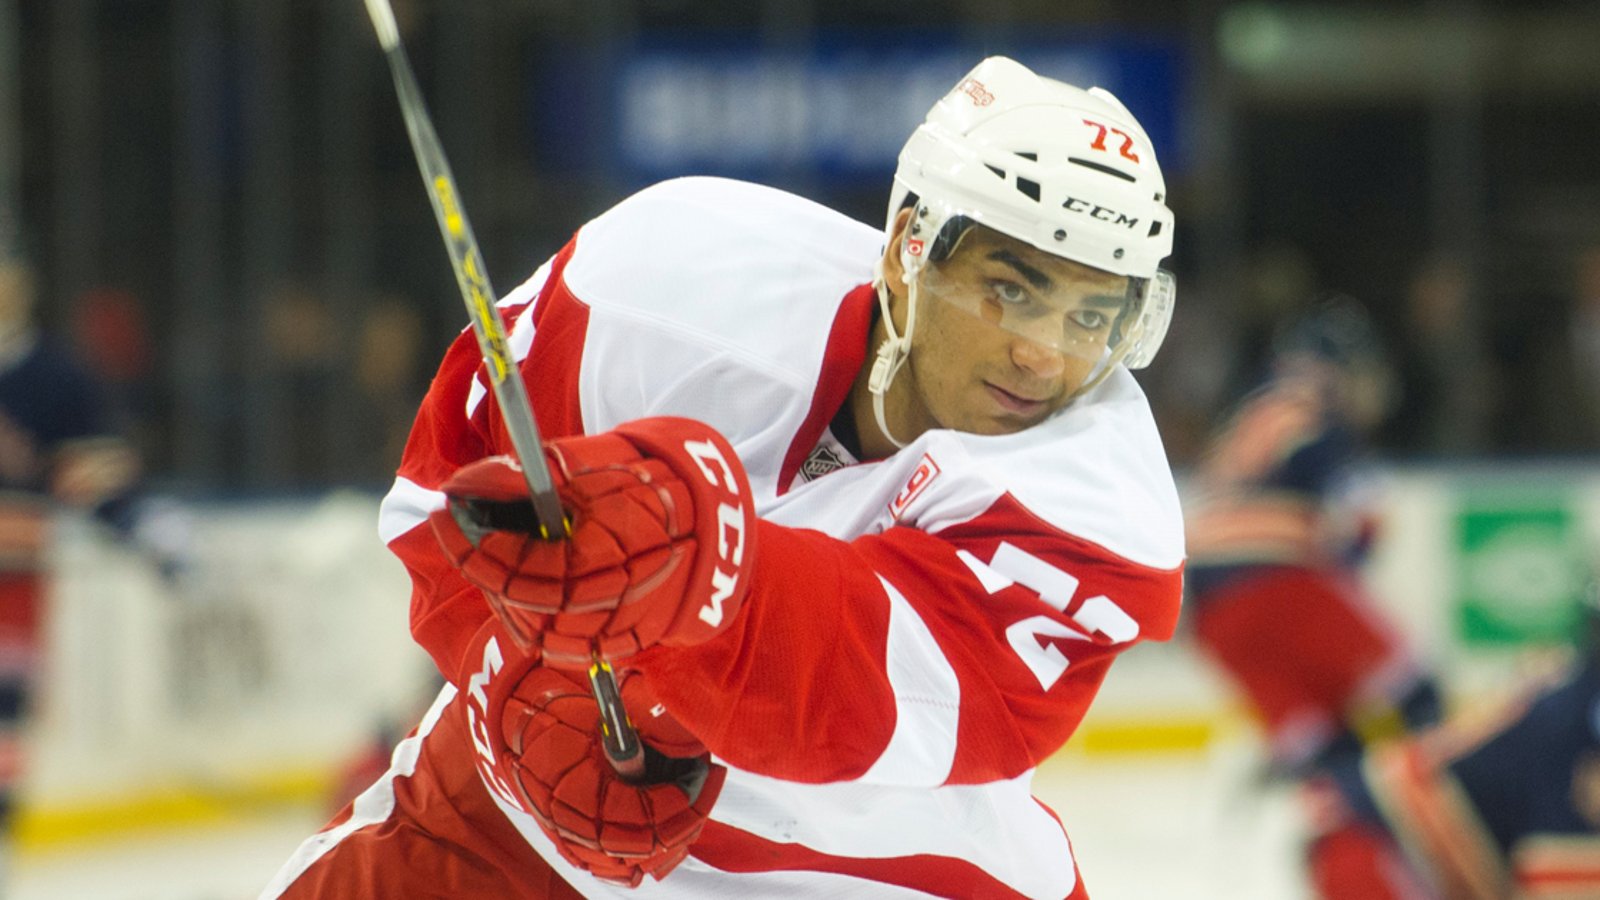 Report: Athanasiou may finally sign in the KHL